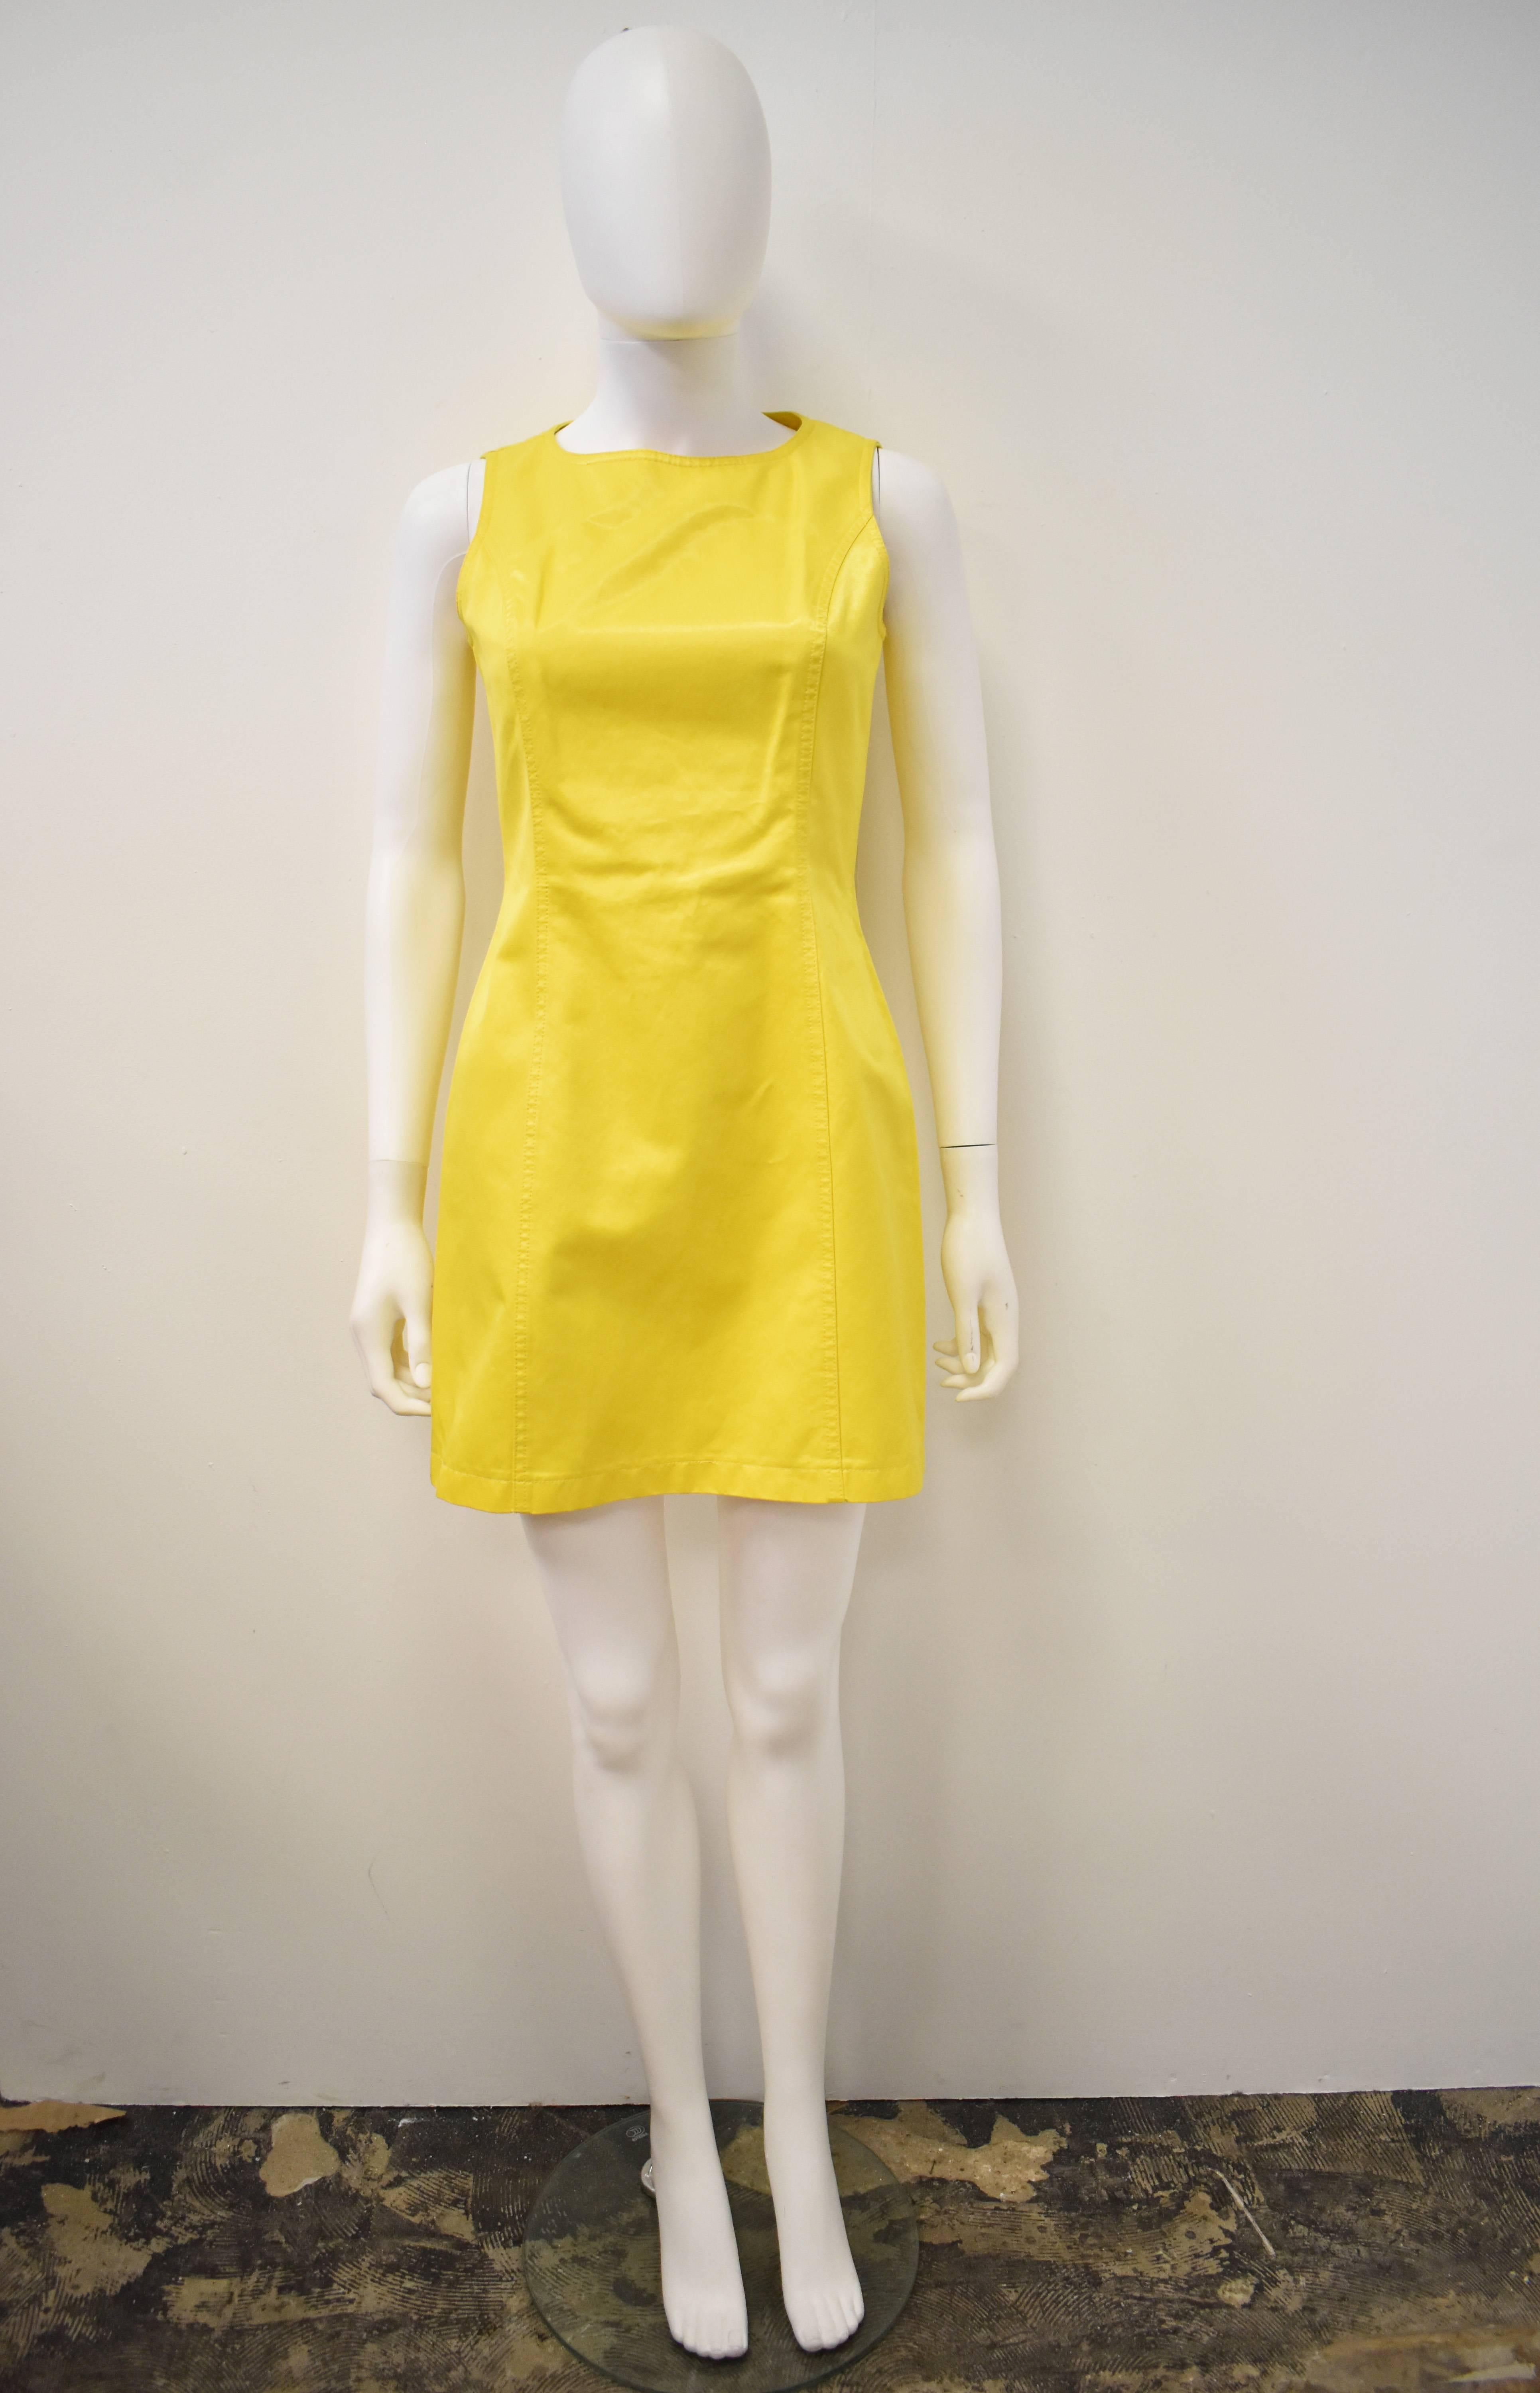 A bright and fun yellow mini dress from the 90’s by Moschino. The dress is sleeveless and has a classic 60’s mini dress shape with fitted waist and slight flair to the skirt. There are two light pen marks on the back of the dress, please see the